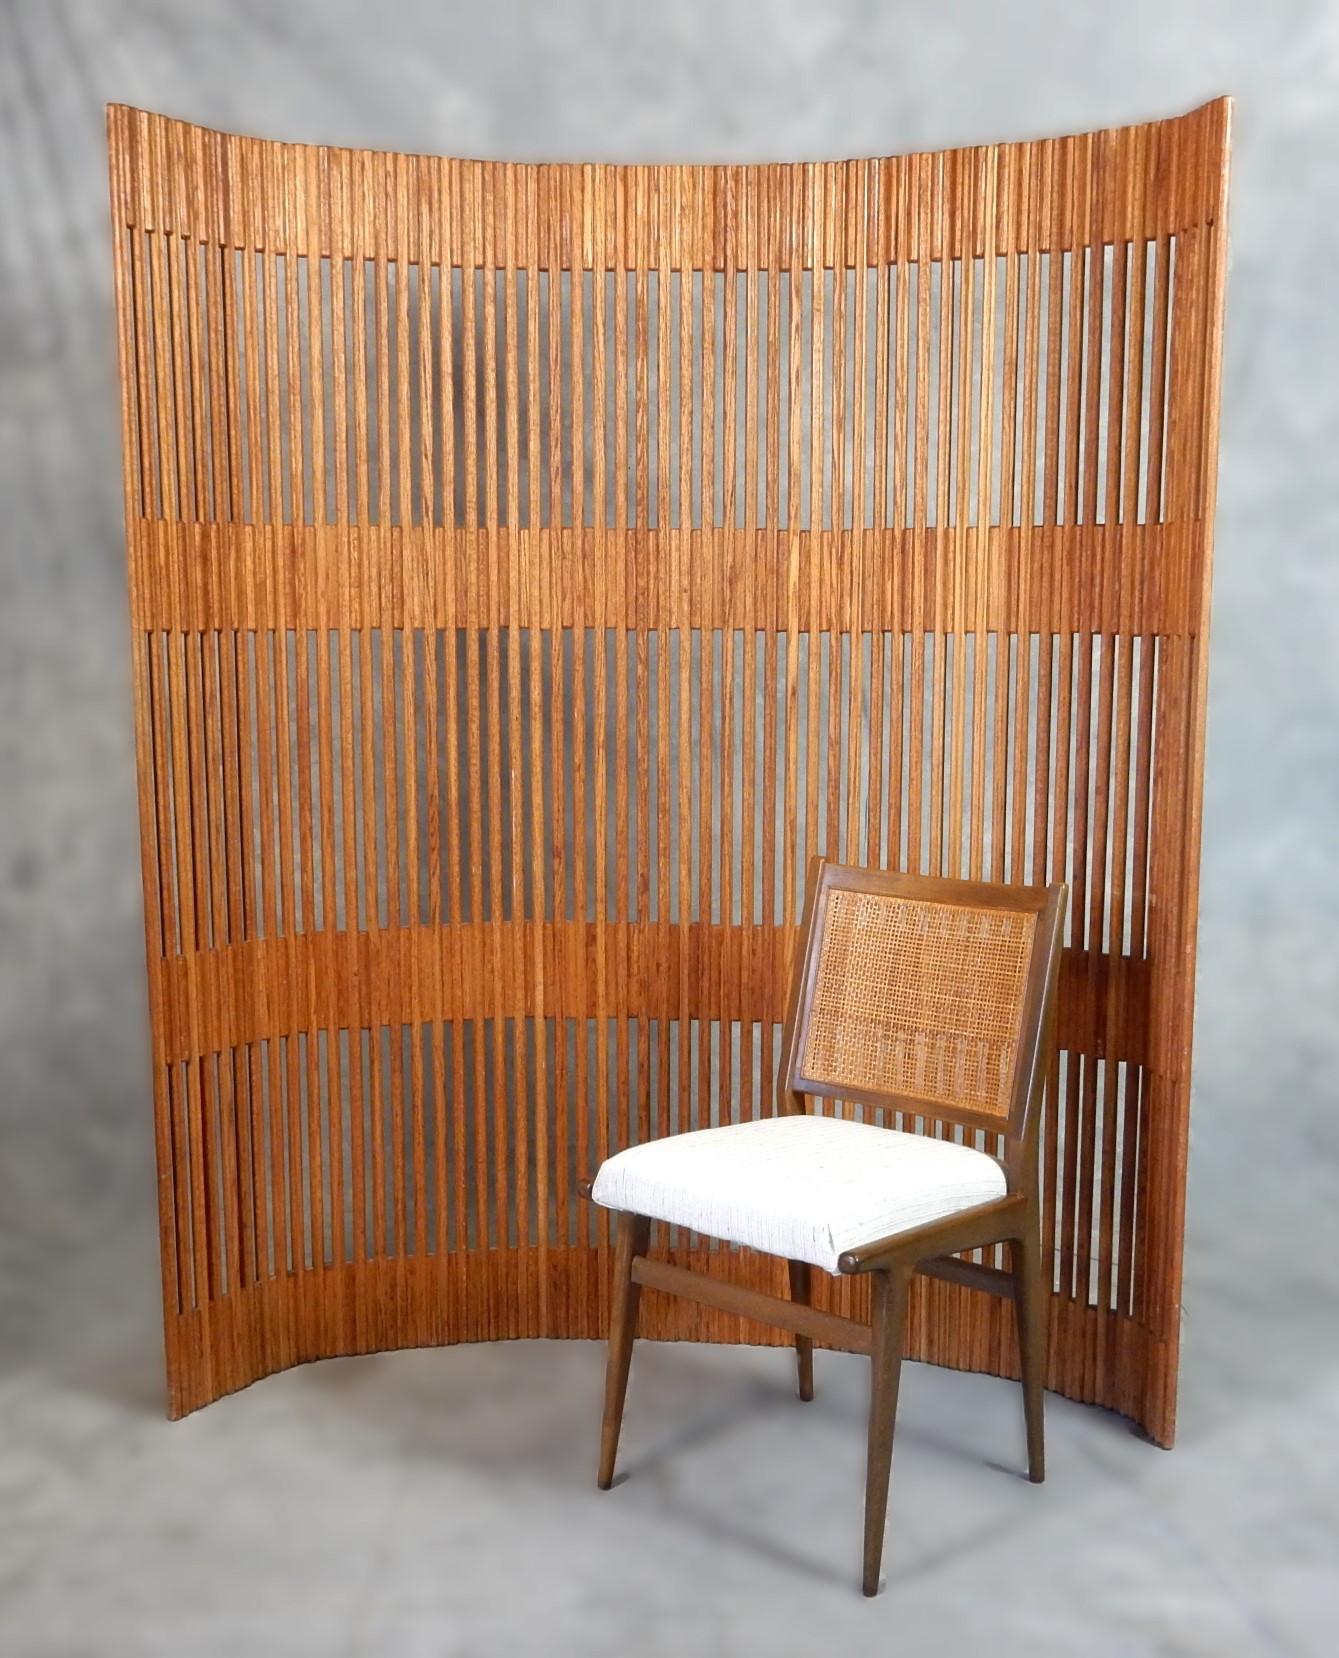 French Mid-Century Articulated Paravent Baumann Screen Room Divider For Sale